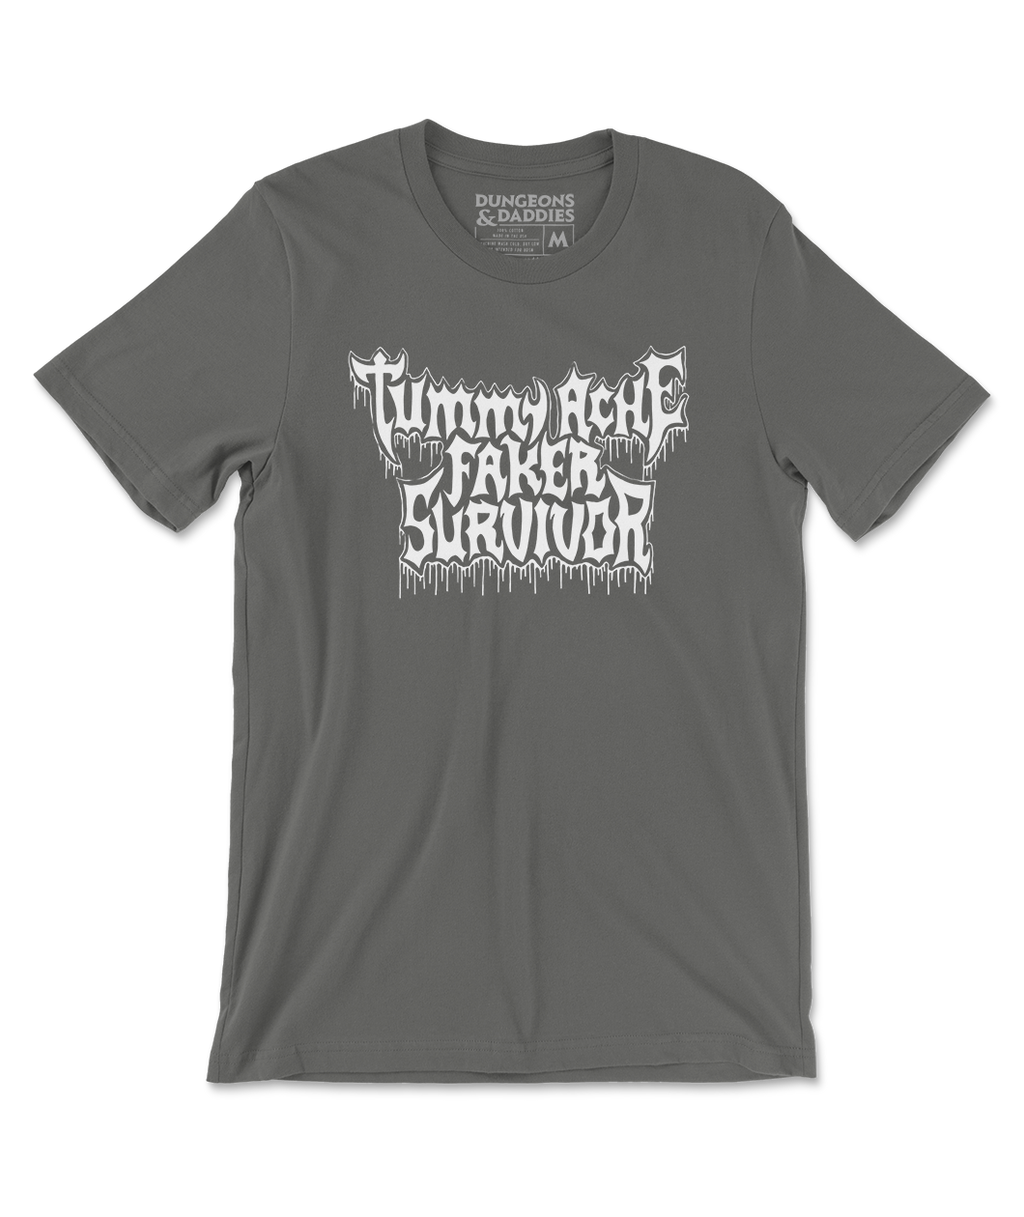 Asphalt gray shirt with words, "TUMMY ACHE FAKER SURVIVOR" written in rock band type font with drippy letters.